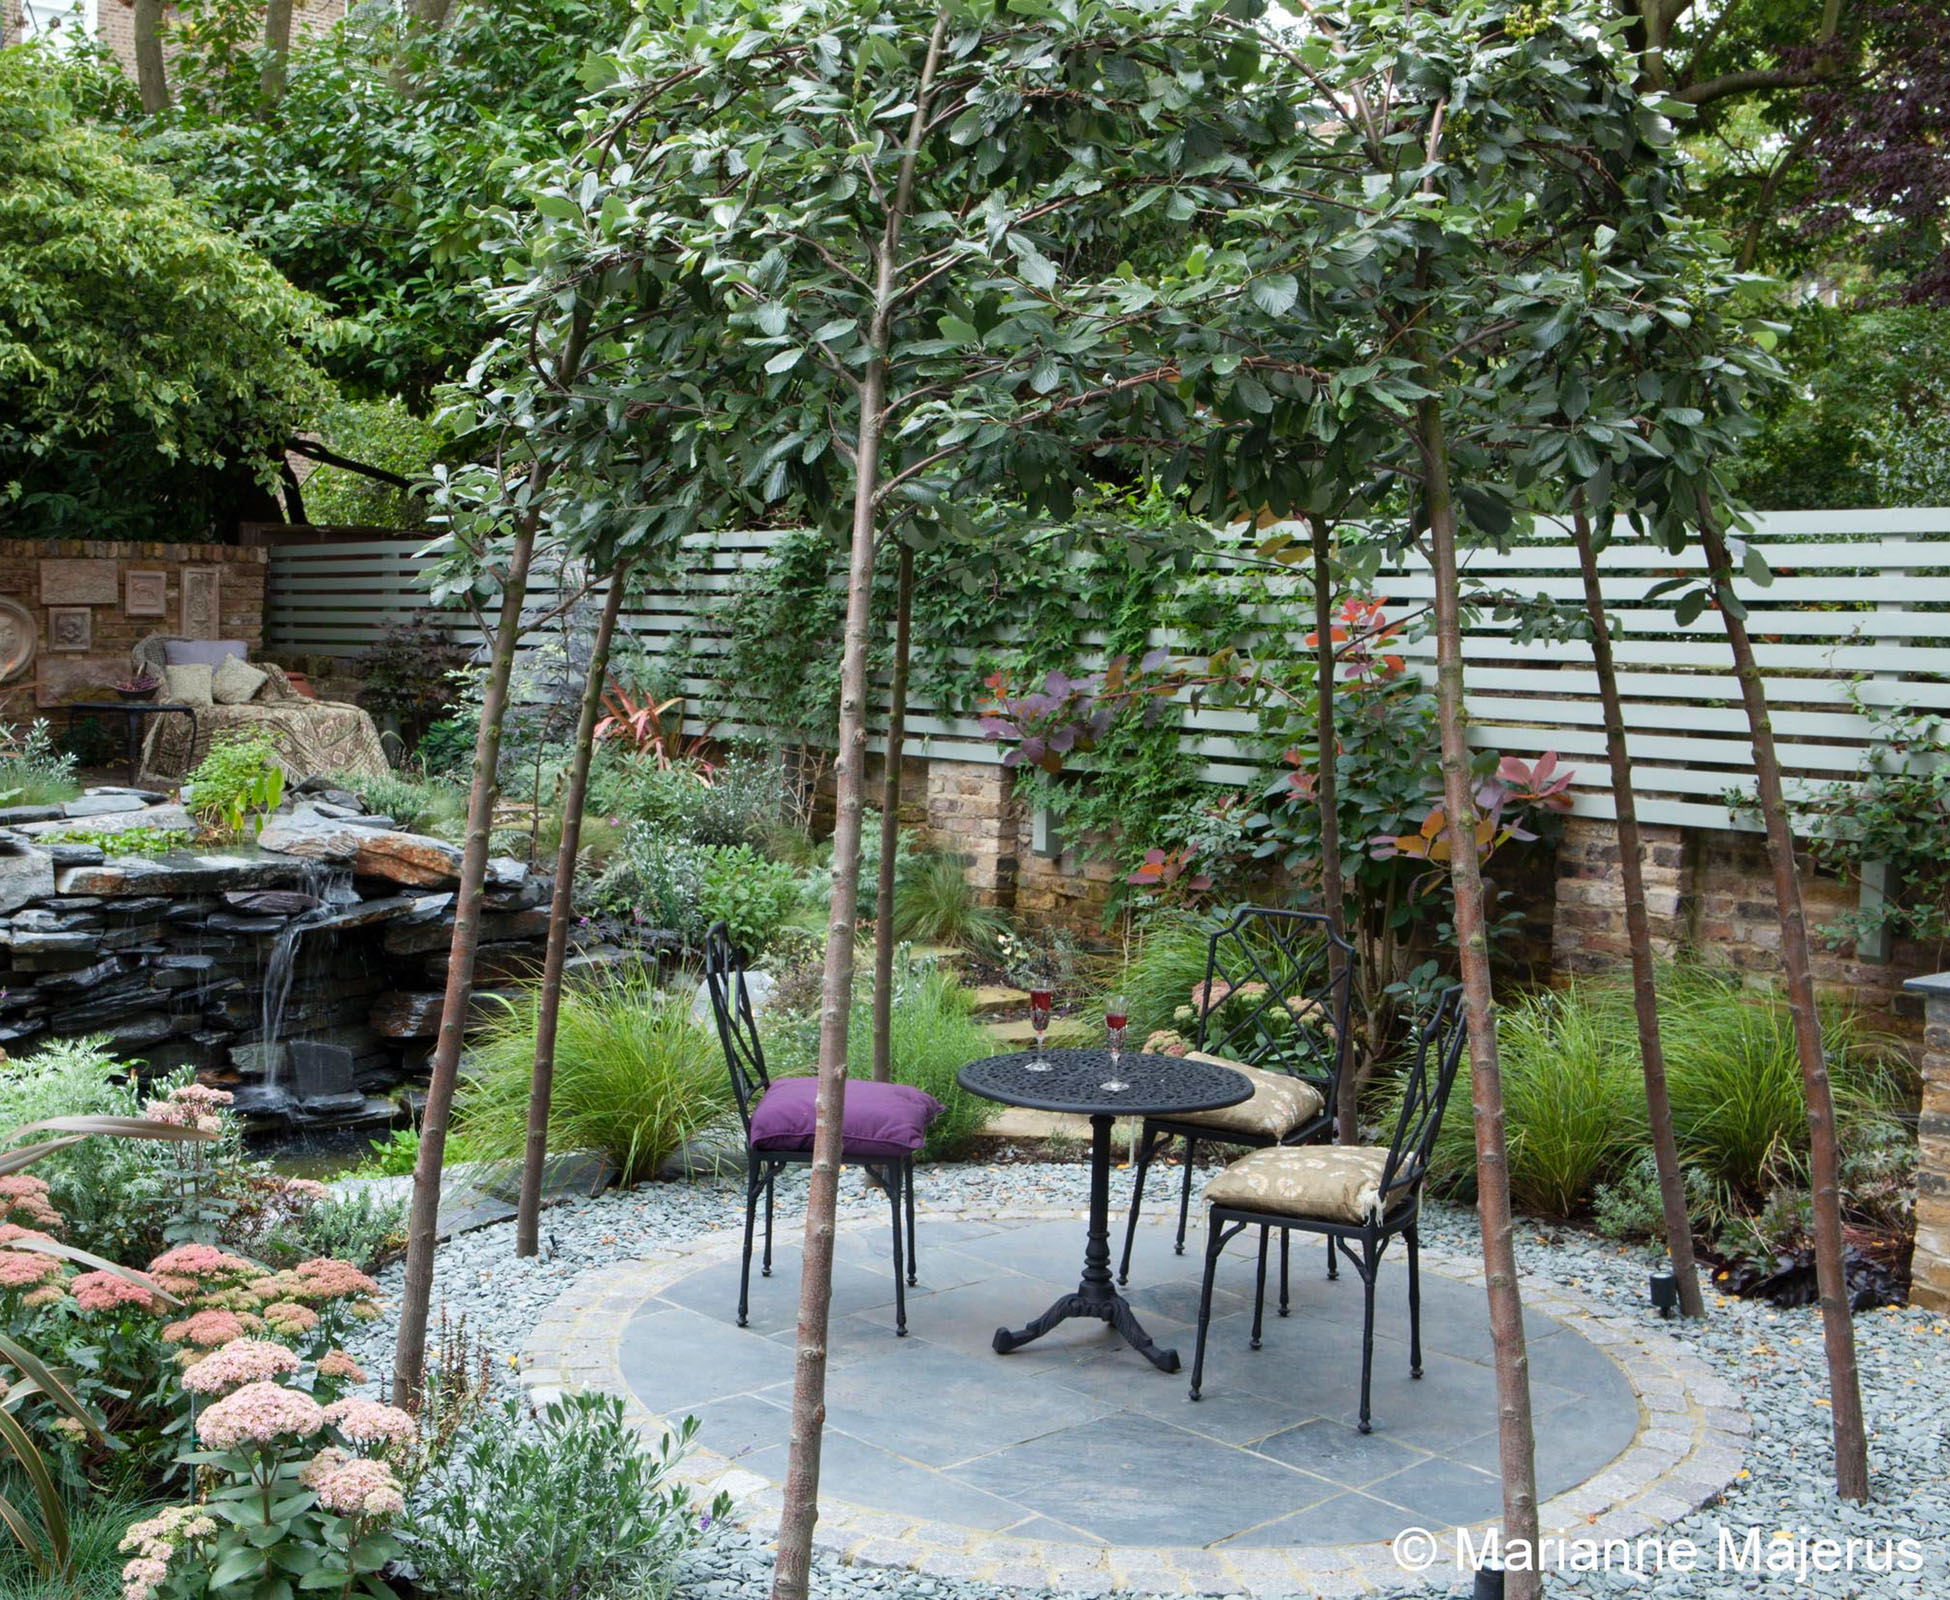 The trees have been trained to create a unusual canopy for the slate patio, that sits in front of the water feature.